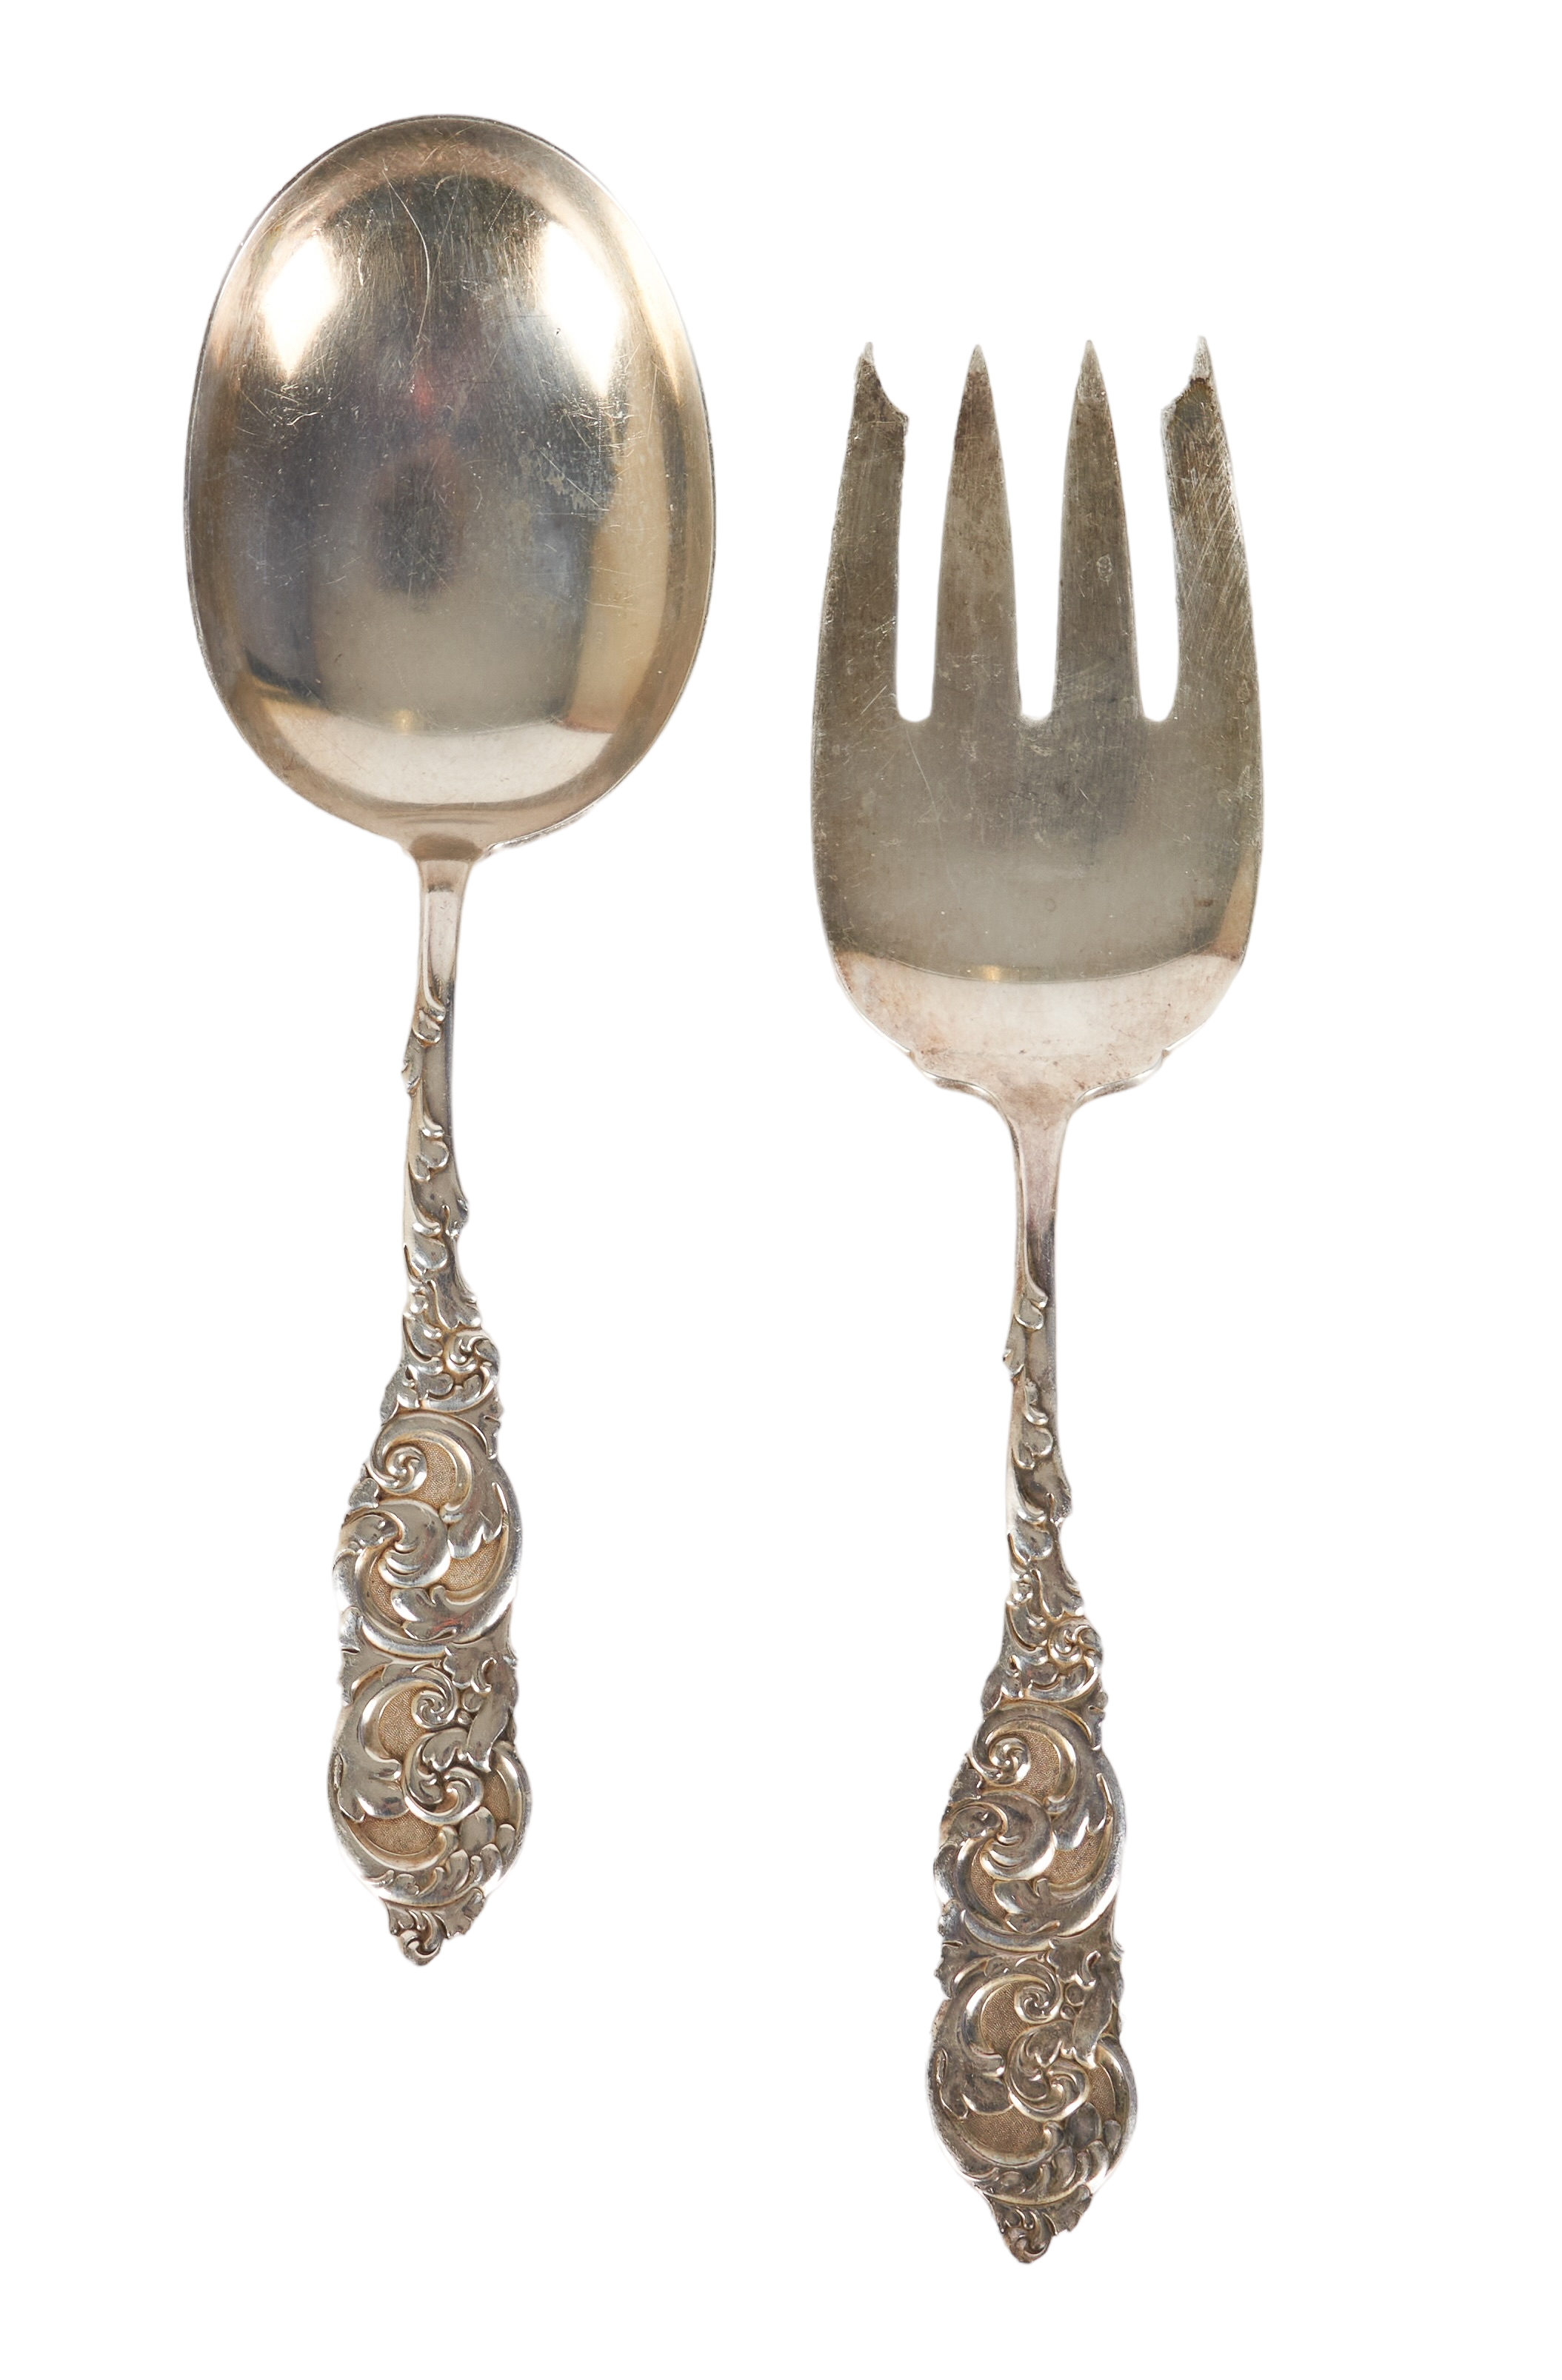 Amston sterling silver serving spoon